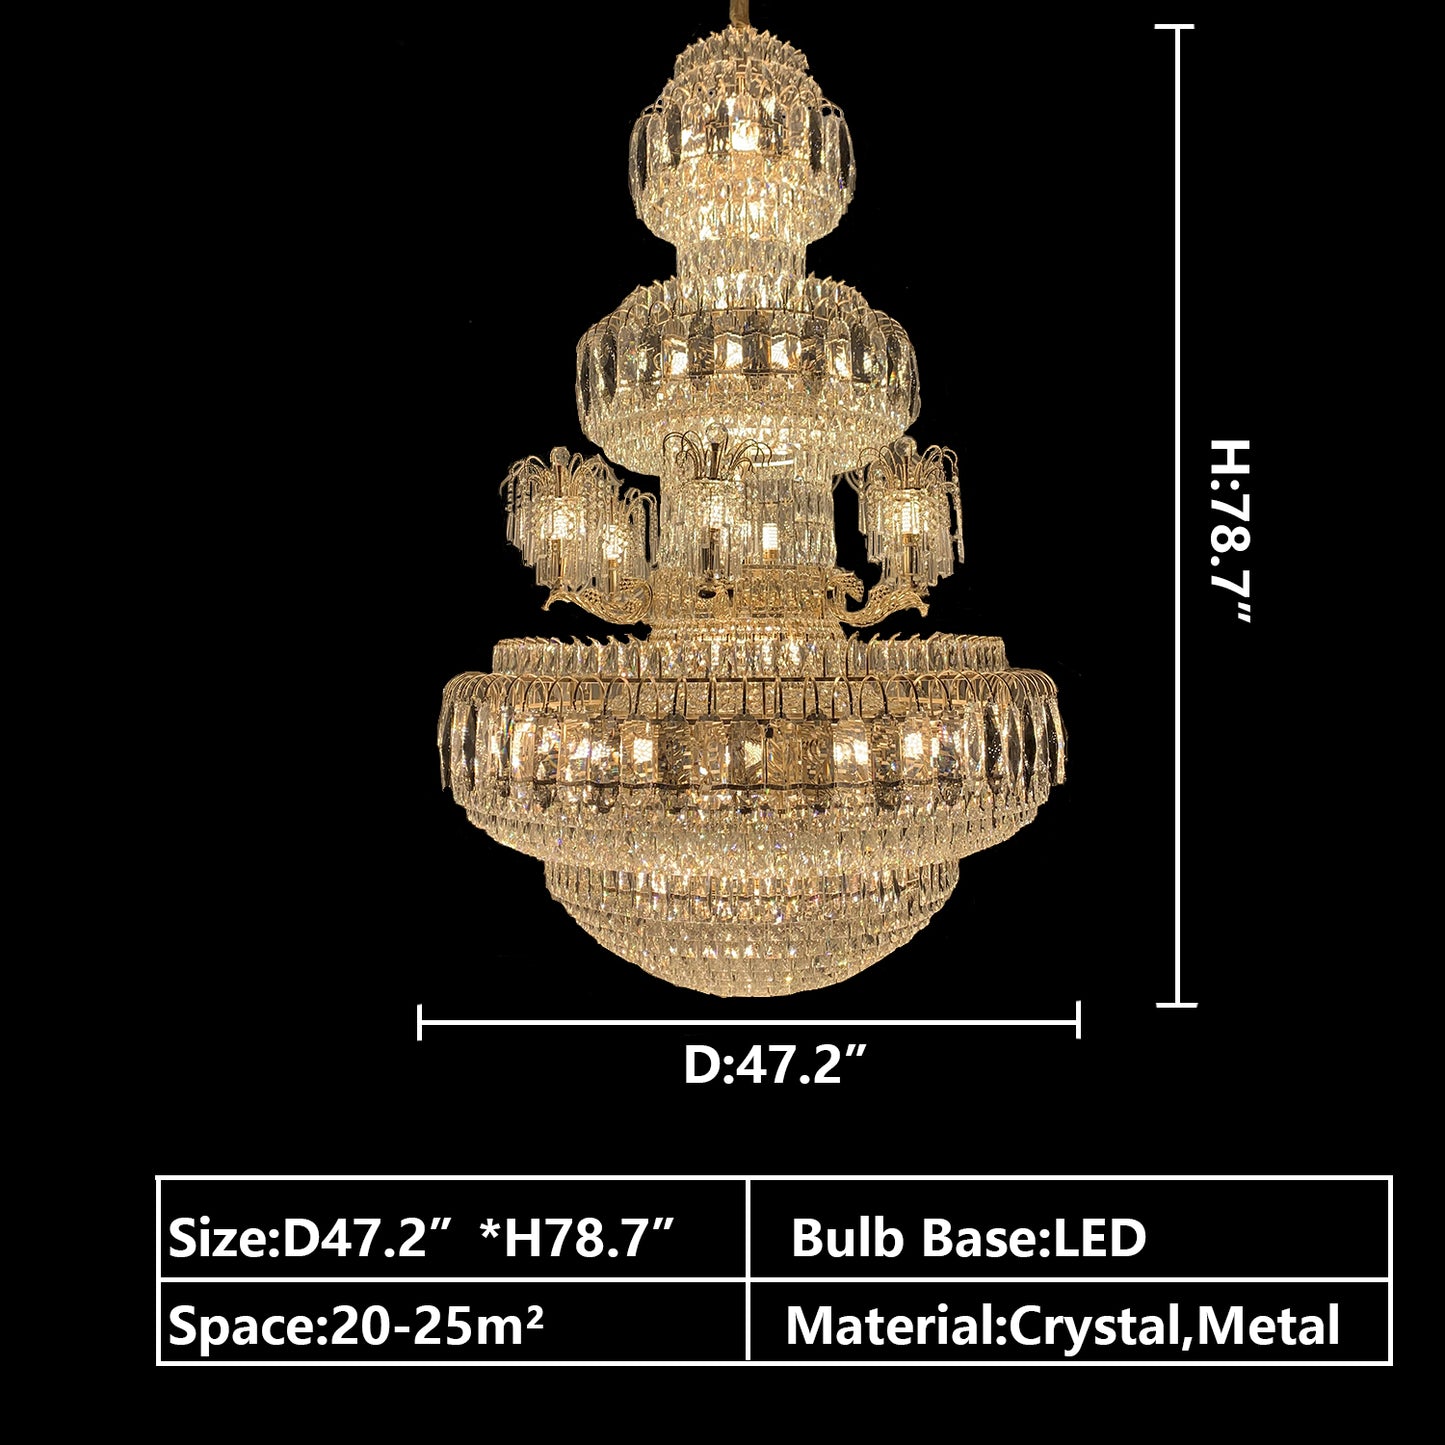 D47.2"*H78.7" chandelier,chaandeliers,pendant,crystal,metal,gold,luxury,empire,ceiling,tiers,layers,multi-tier,extra large,oversized,large,huge,big,living room,dining room,high-ceiling room,foyer,stairs,hallway,entryance,hotel lobby,duplex hall,loft